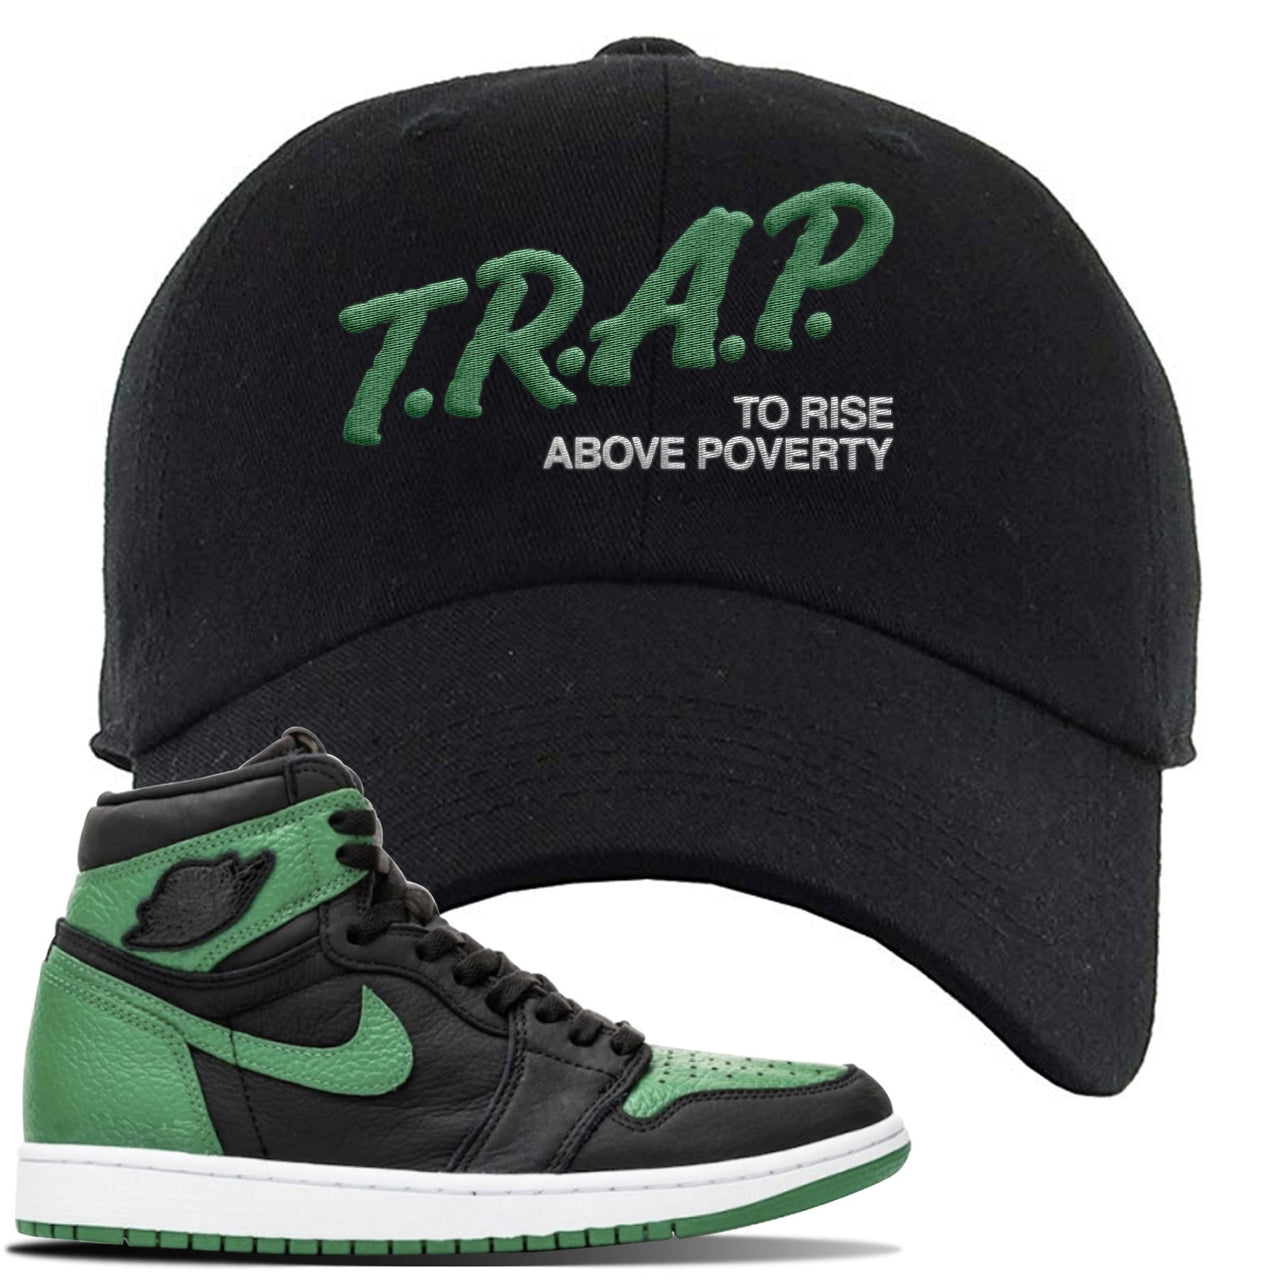 Jordan 1 Retro High OG Pine Green Gym Sneaker Black Dad Hat | Hat to match Air Jordan 1 Retro High OG Pine Green Gym Shoes | Trap To Rise Above Poverty